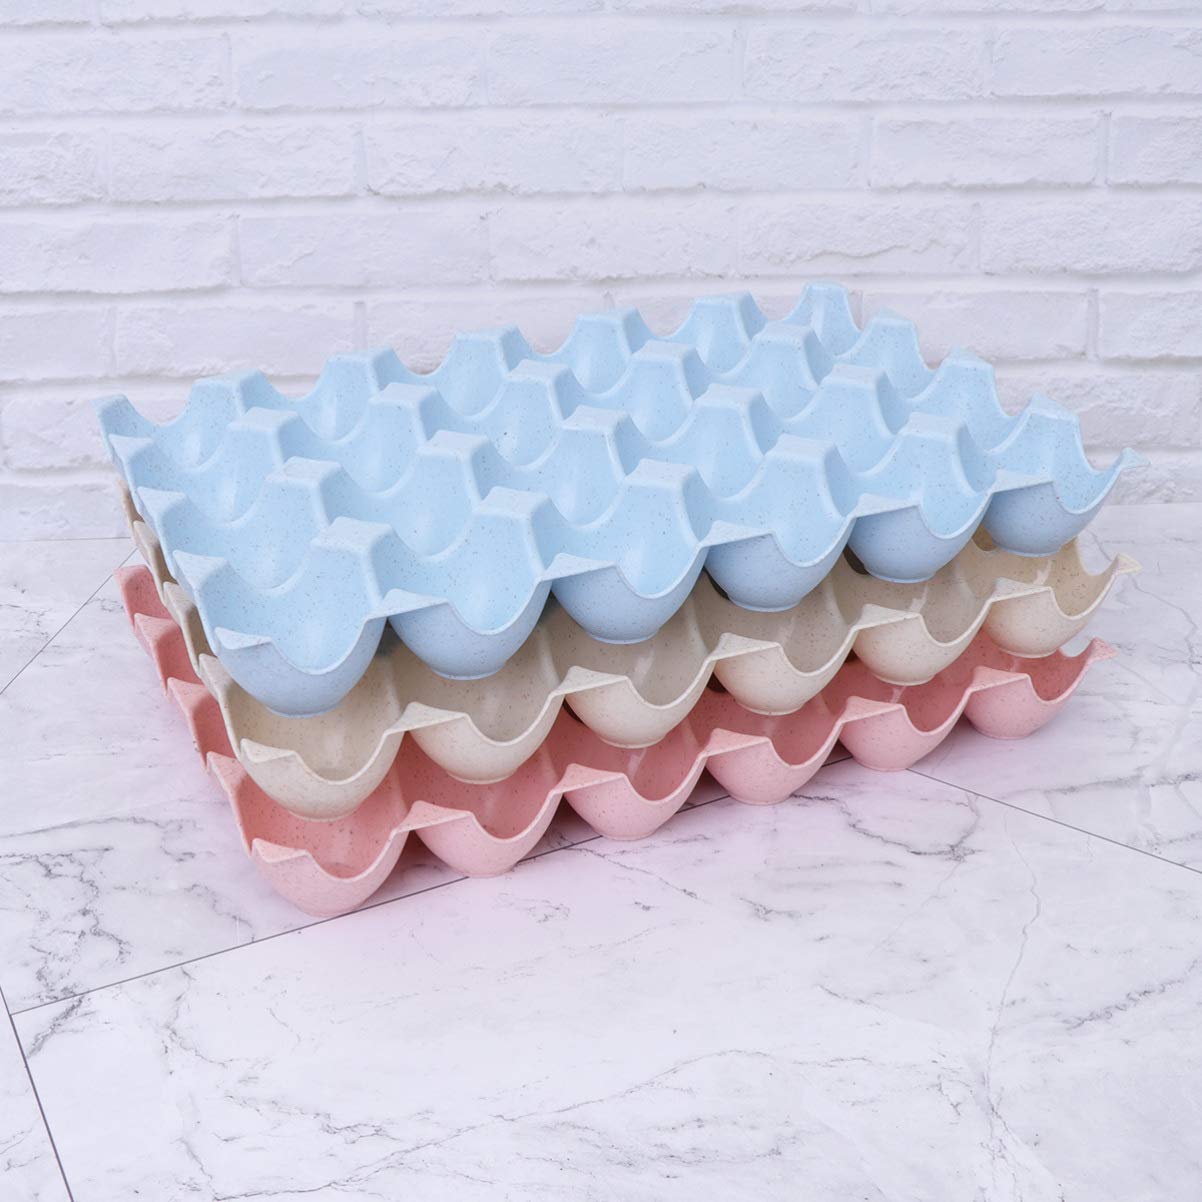 Cabilock 3pcs Dispenser Wheat Straw Breakage-proof Stackable Holder Rack Display Container Eggs for Crate Fridge Storing Tray Refrigerator Storage Random Grids Kitchen Plate Color Flats